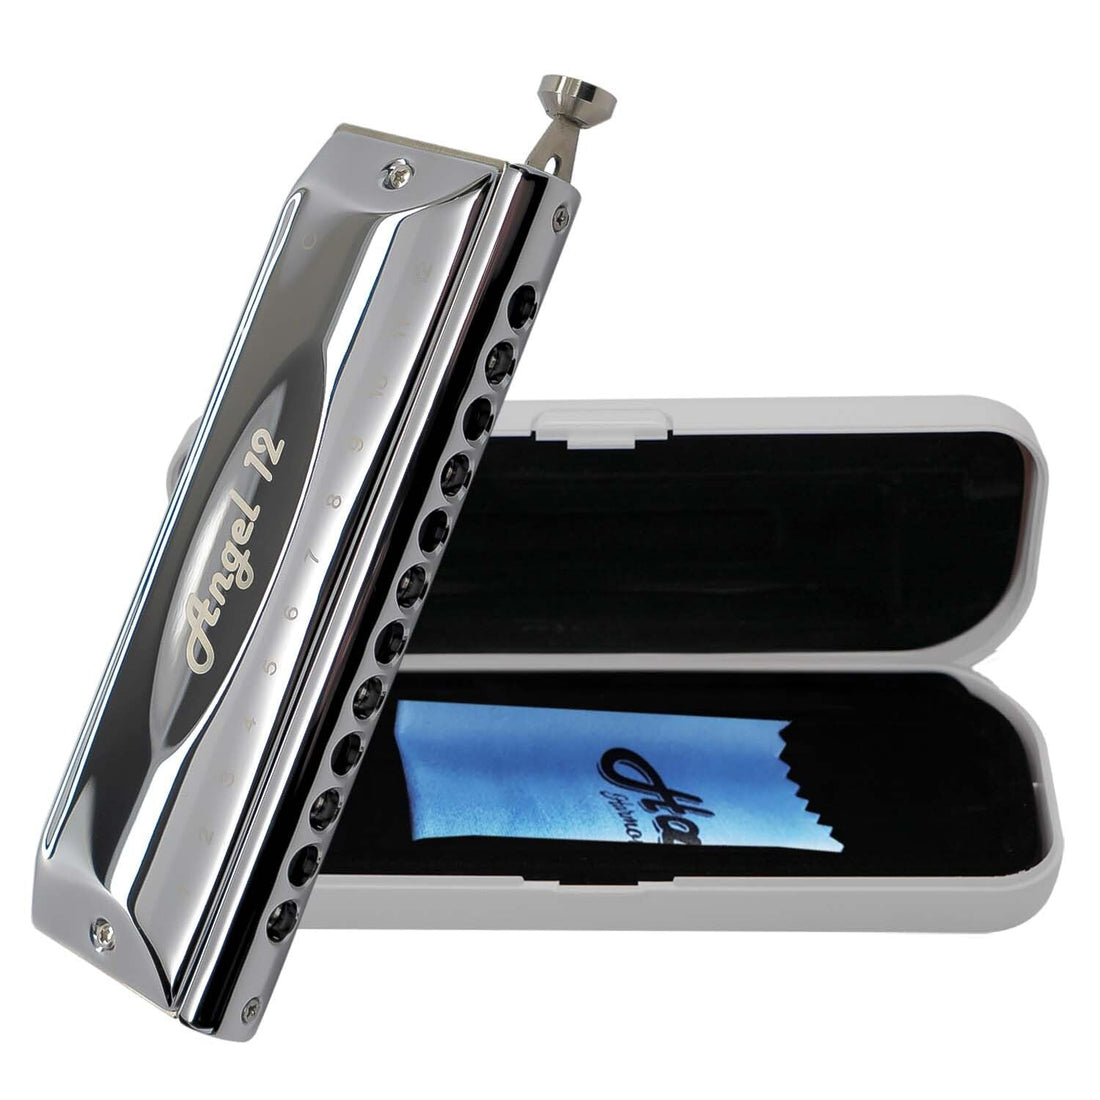 Harmo Angel 12 Chromatic Harmonica Key of A - 12 Hole Mouth Organ with Precision Slider, Phosphore Bronze Reeds, Suitable for All Genres - Harmonicas for Beginners to Professionals, Designed in USA